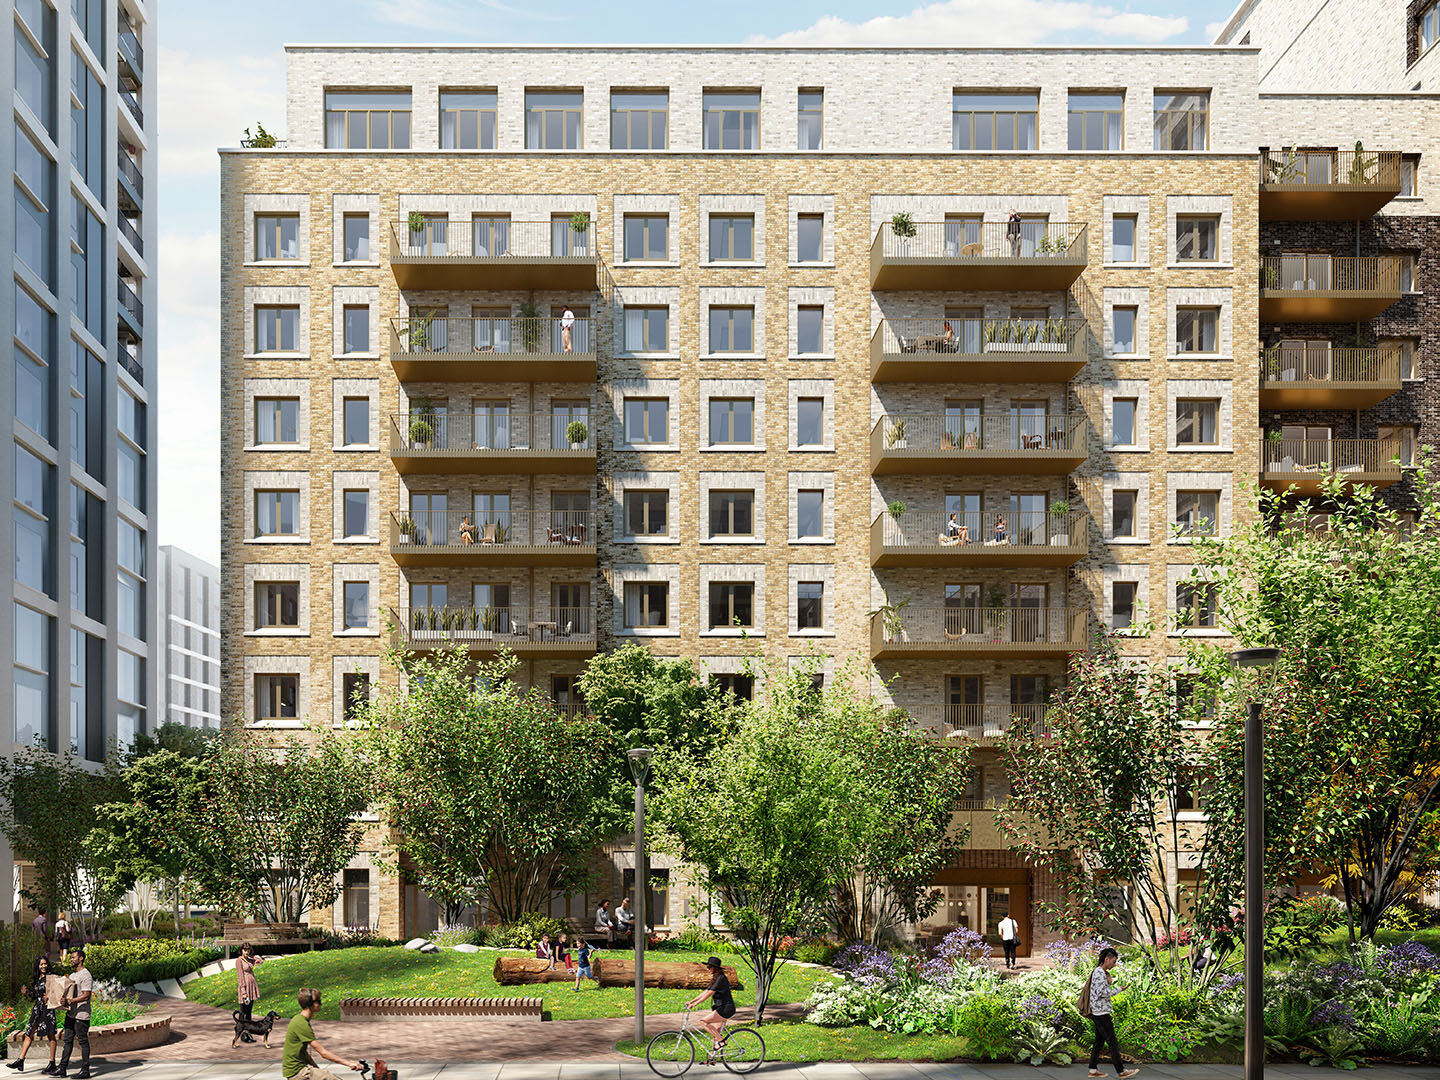 Construction starts on affordable homes at Brent Cross Town